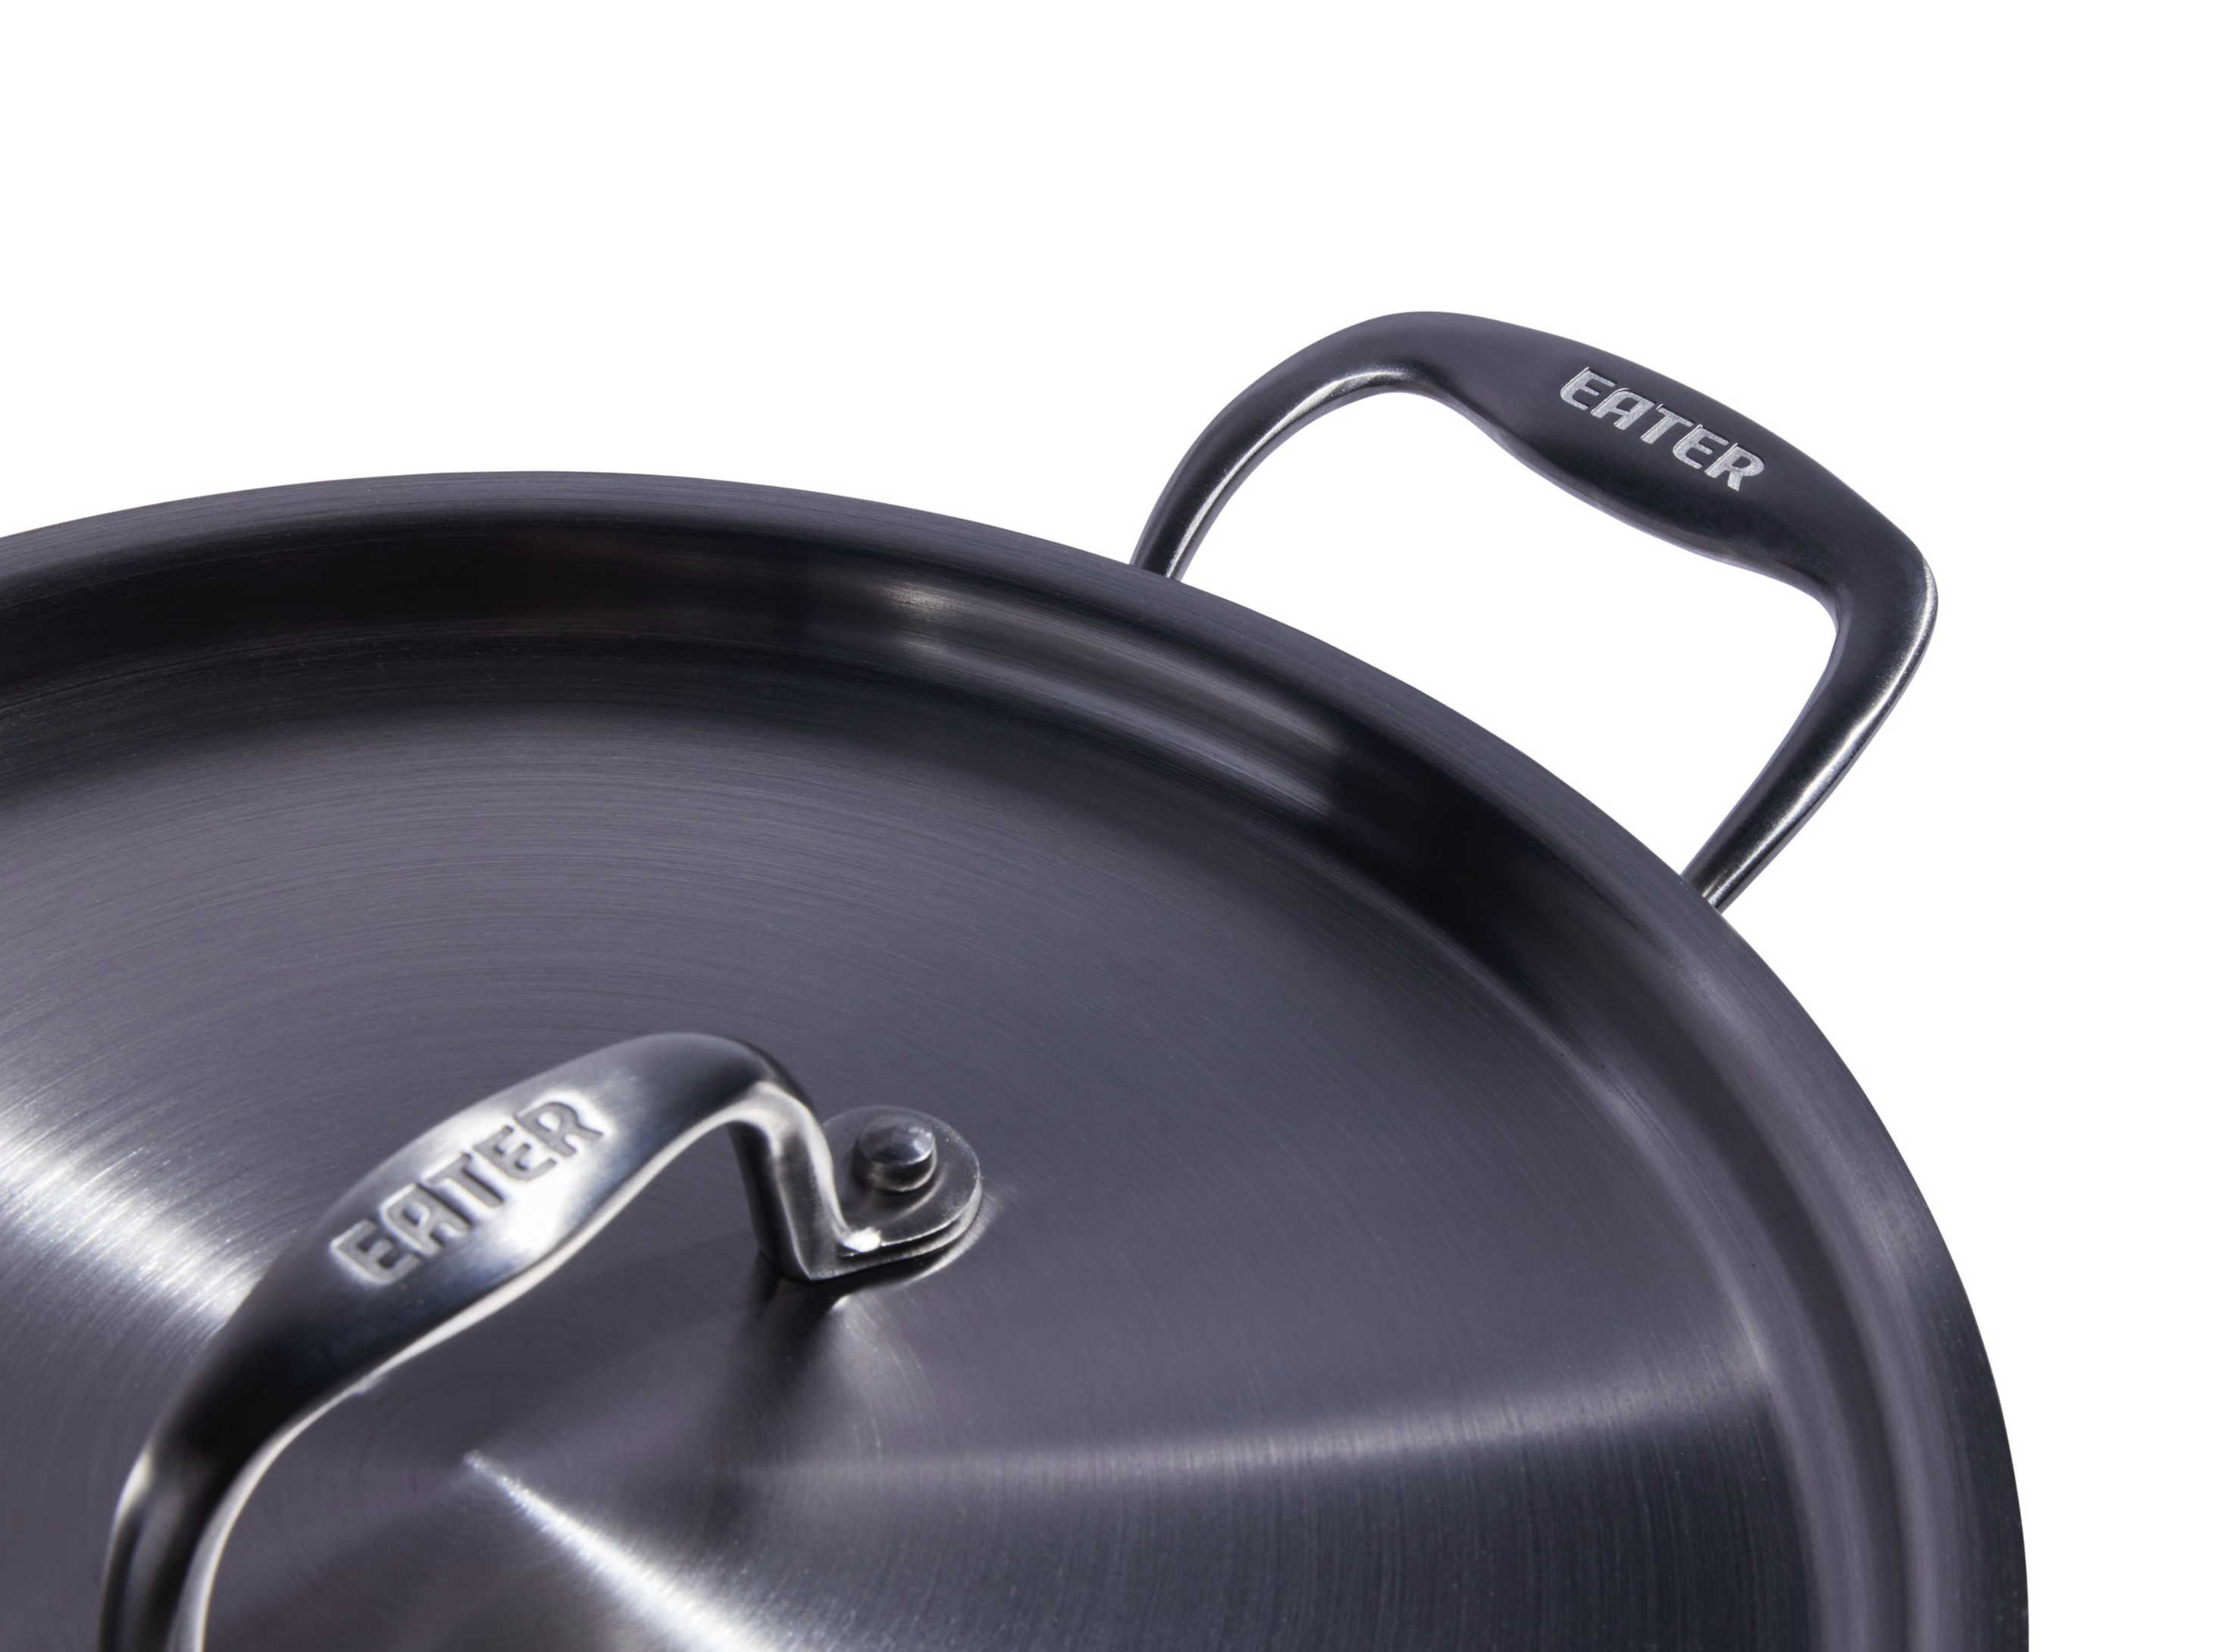 Eater expands its e-commerce ambitions with a cookware line